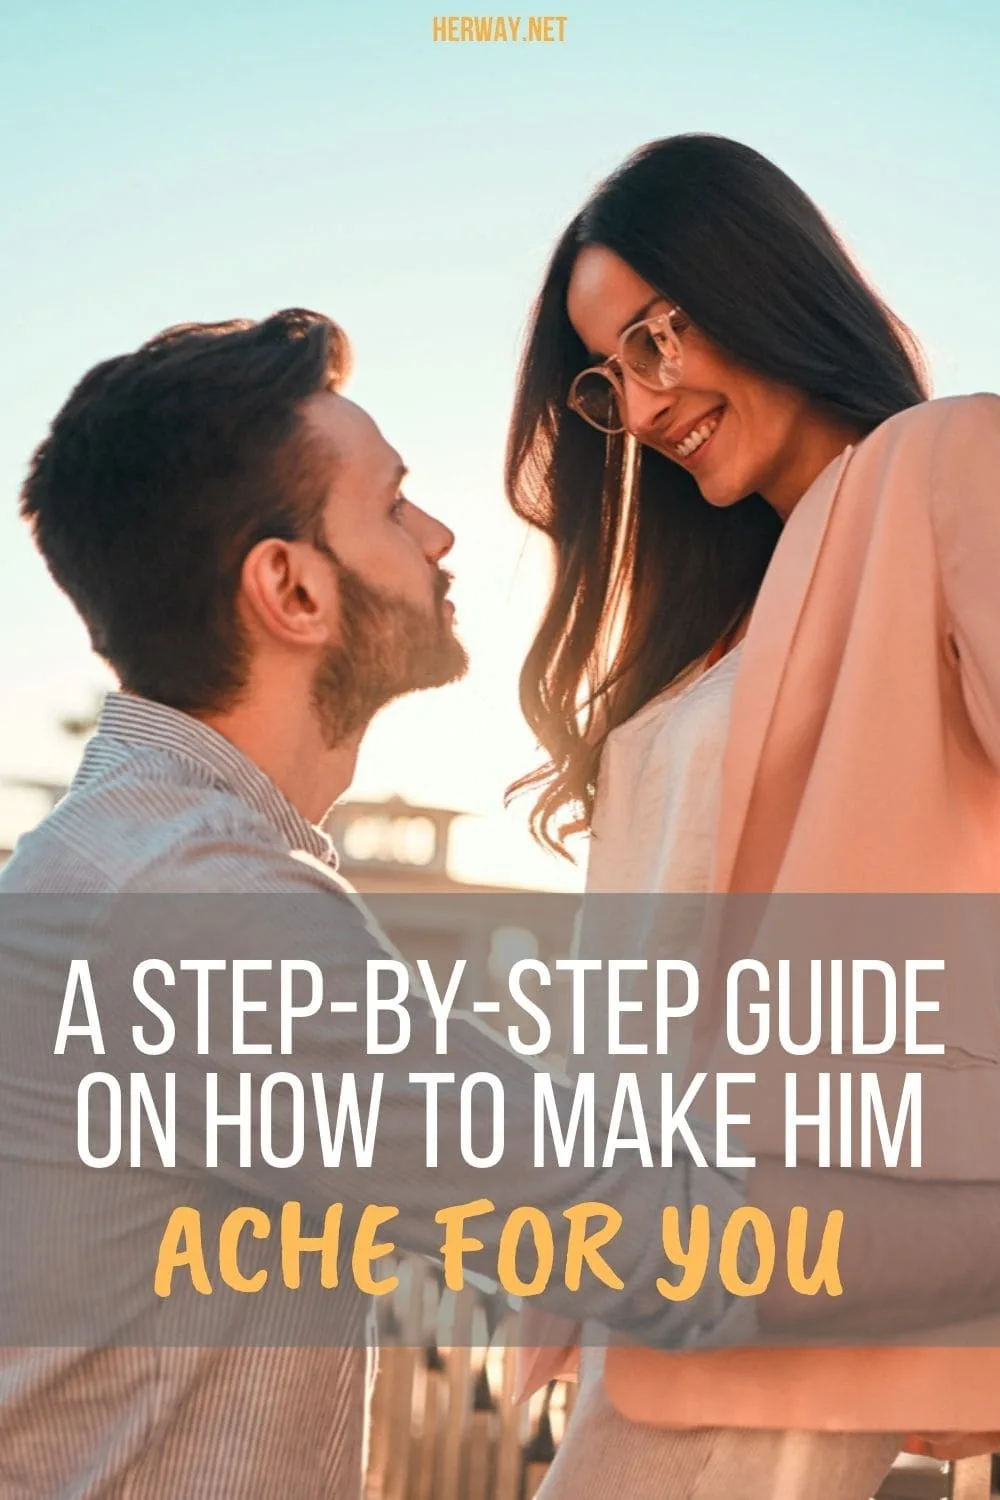 A Step-By-Step Guide On How To Make Him Ache For You